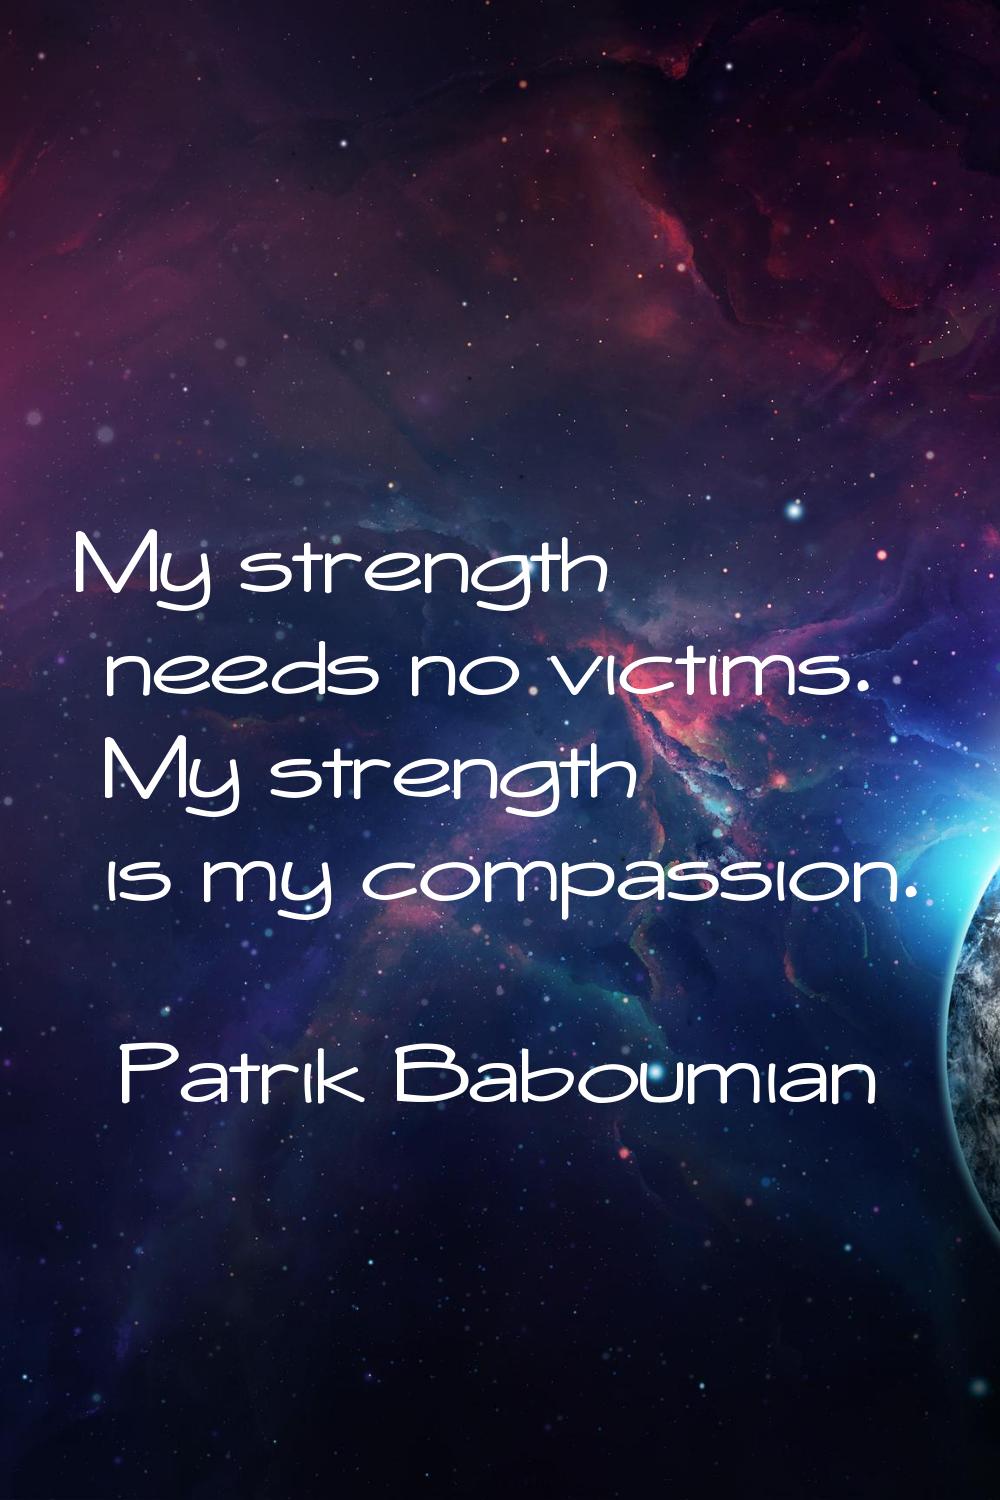 My strength needs no victims. My strength is my compassion.